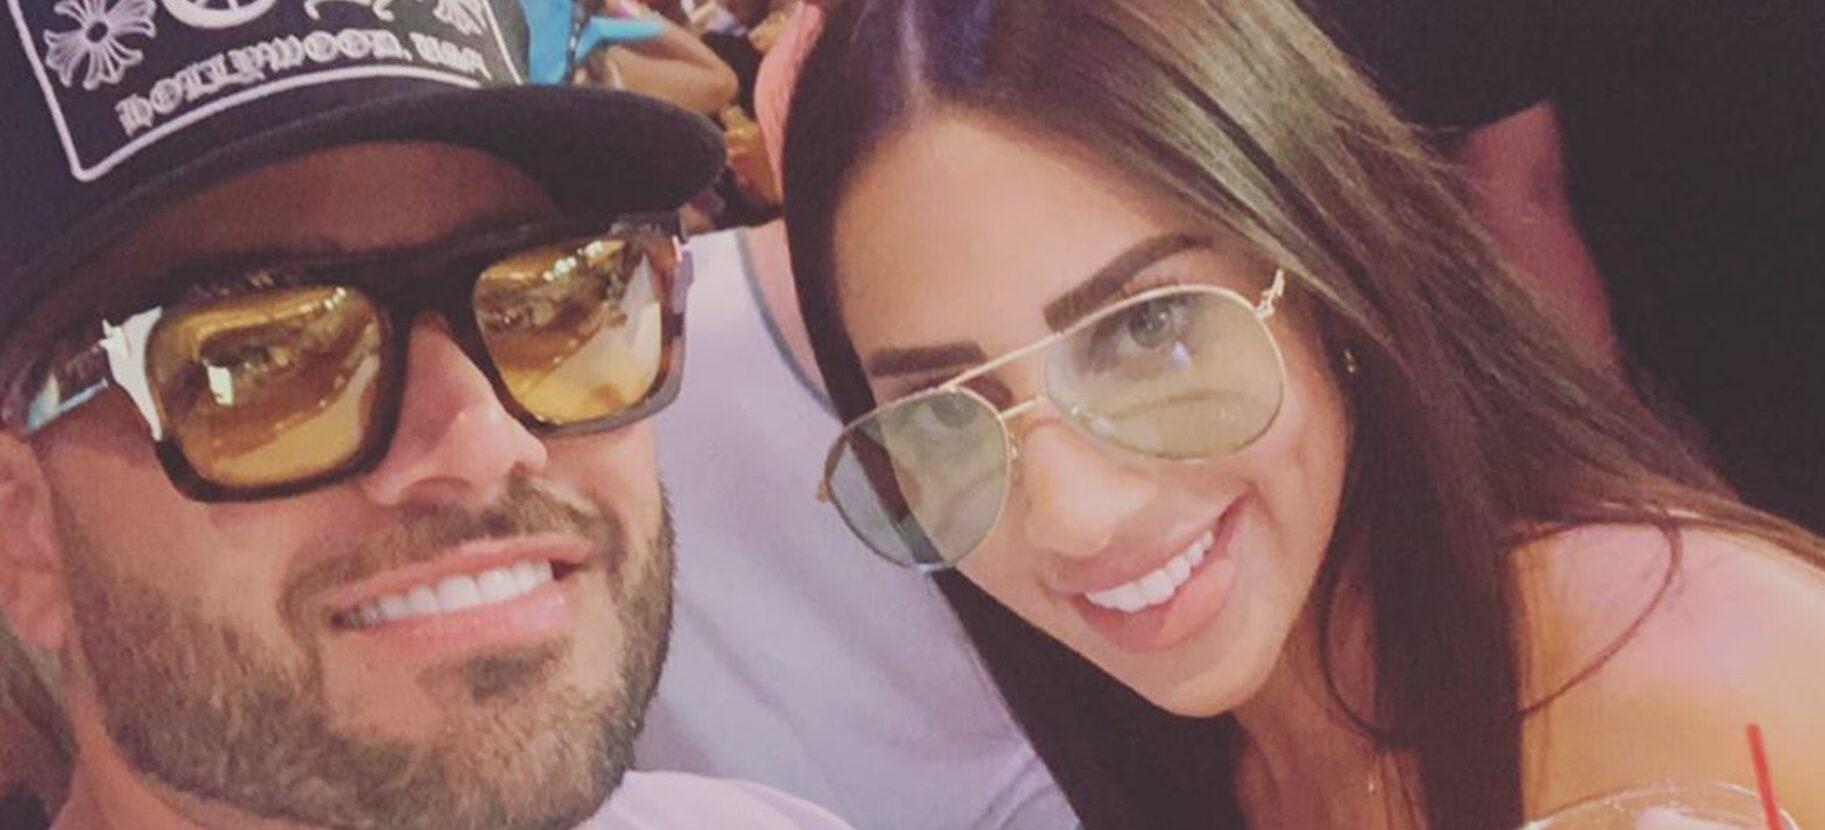 Fans Slam Mike Shouhed In Response To His Shocking Domestic Violence Lawsuit